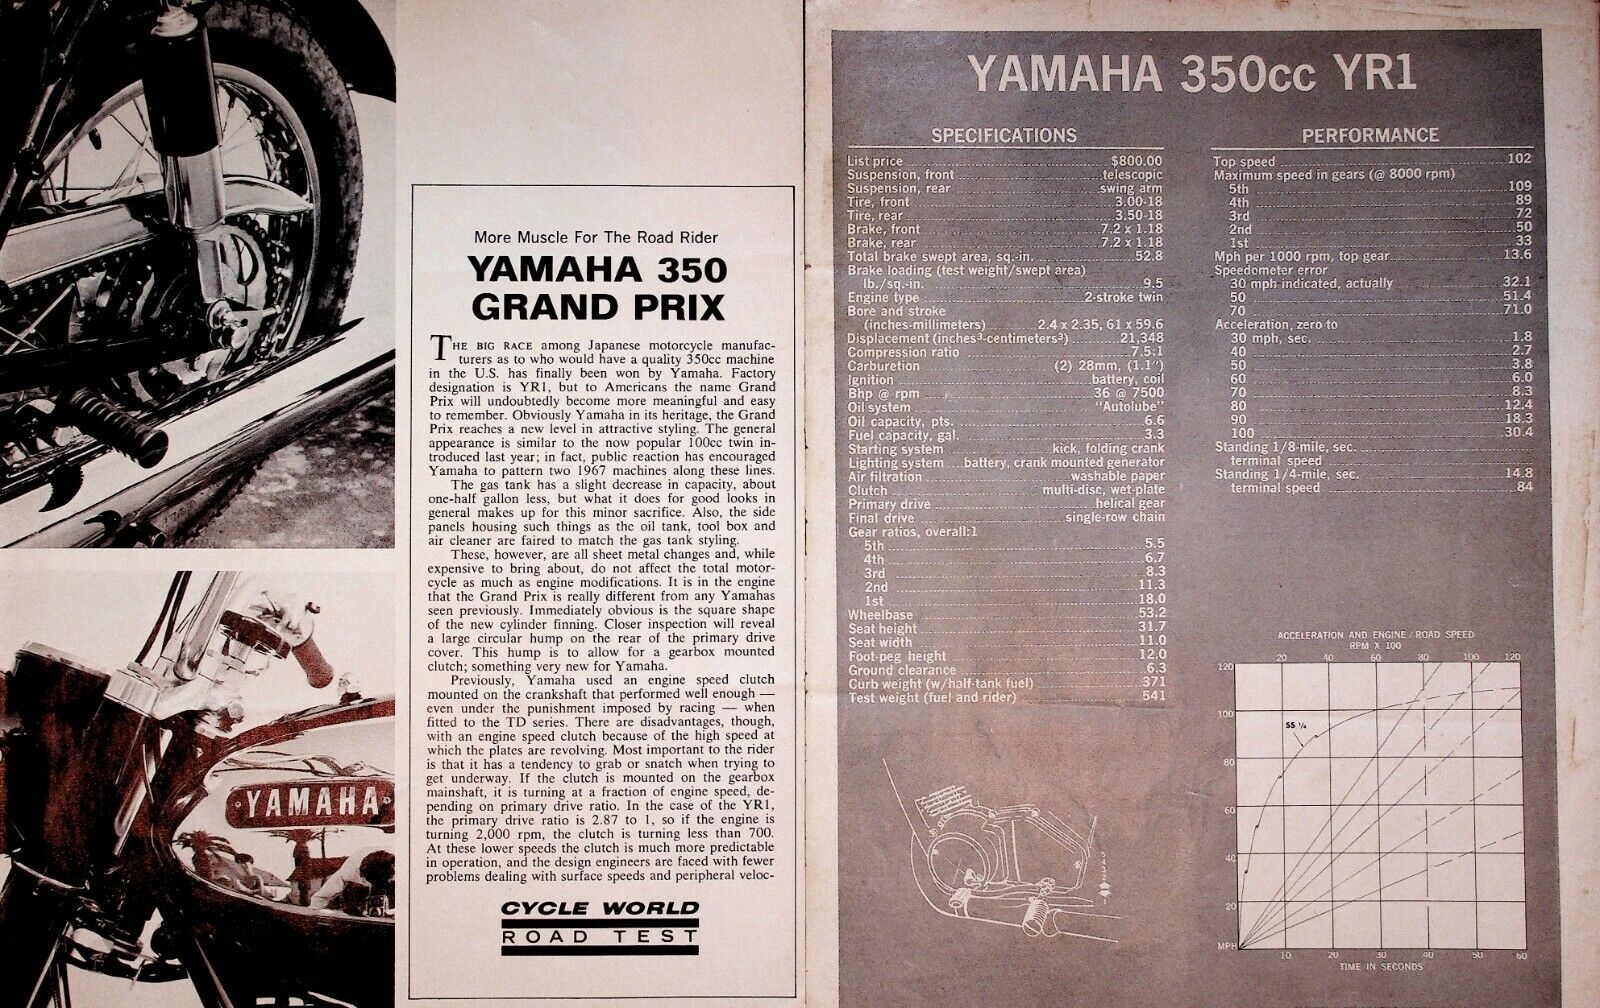 1967 Yamaha 350 Grand Prix YR1 - 4-Page Vintage Motorcycle Road Test Article